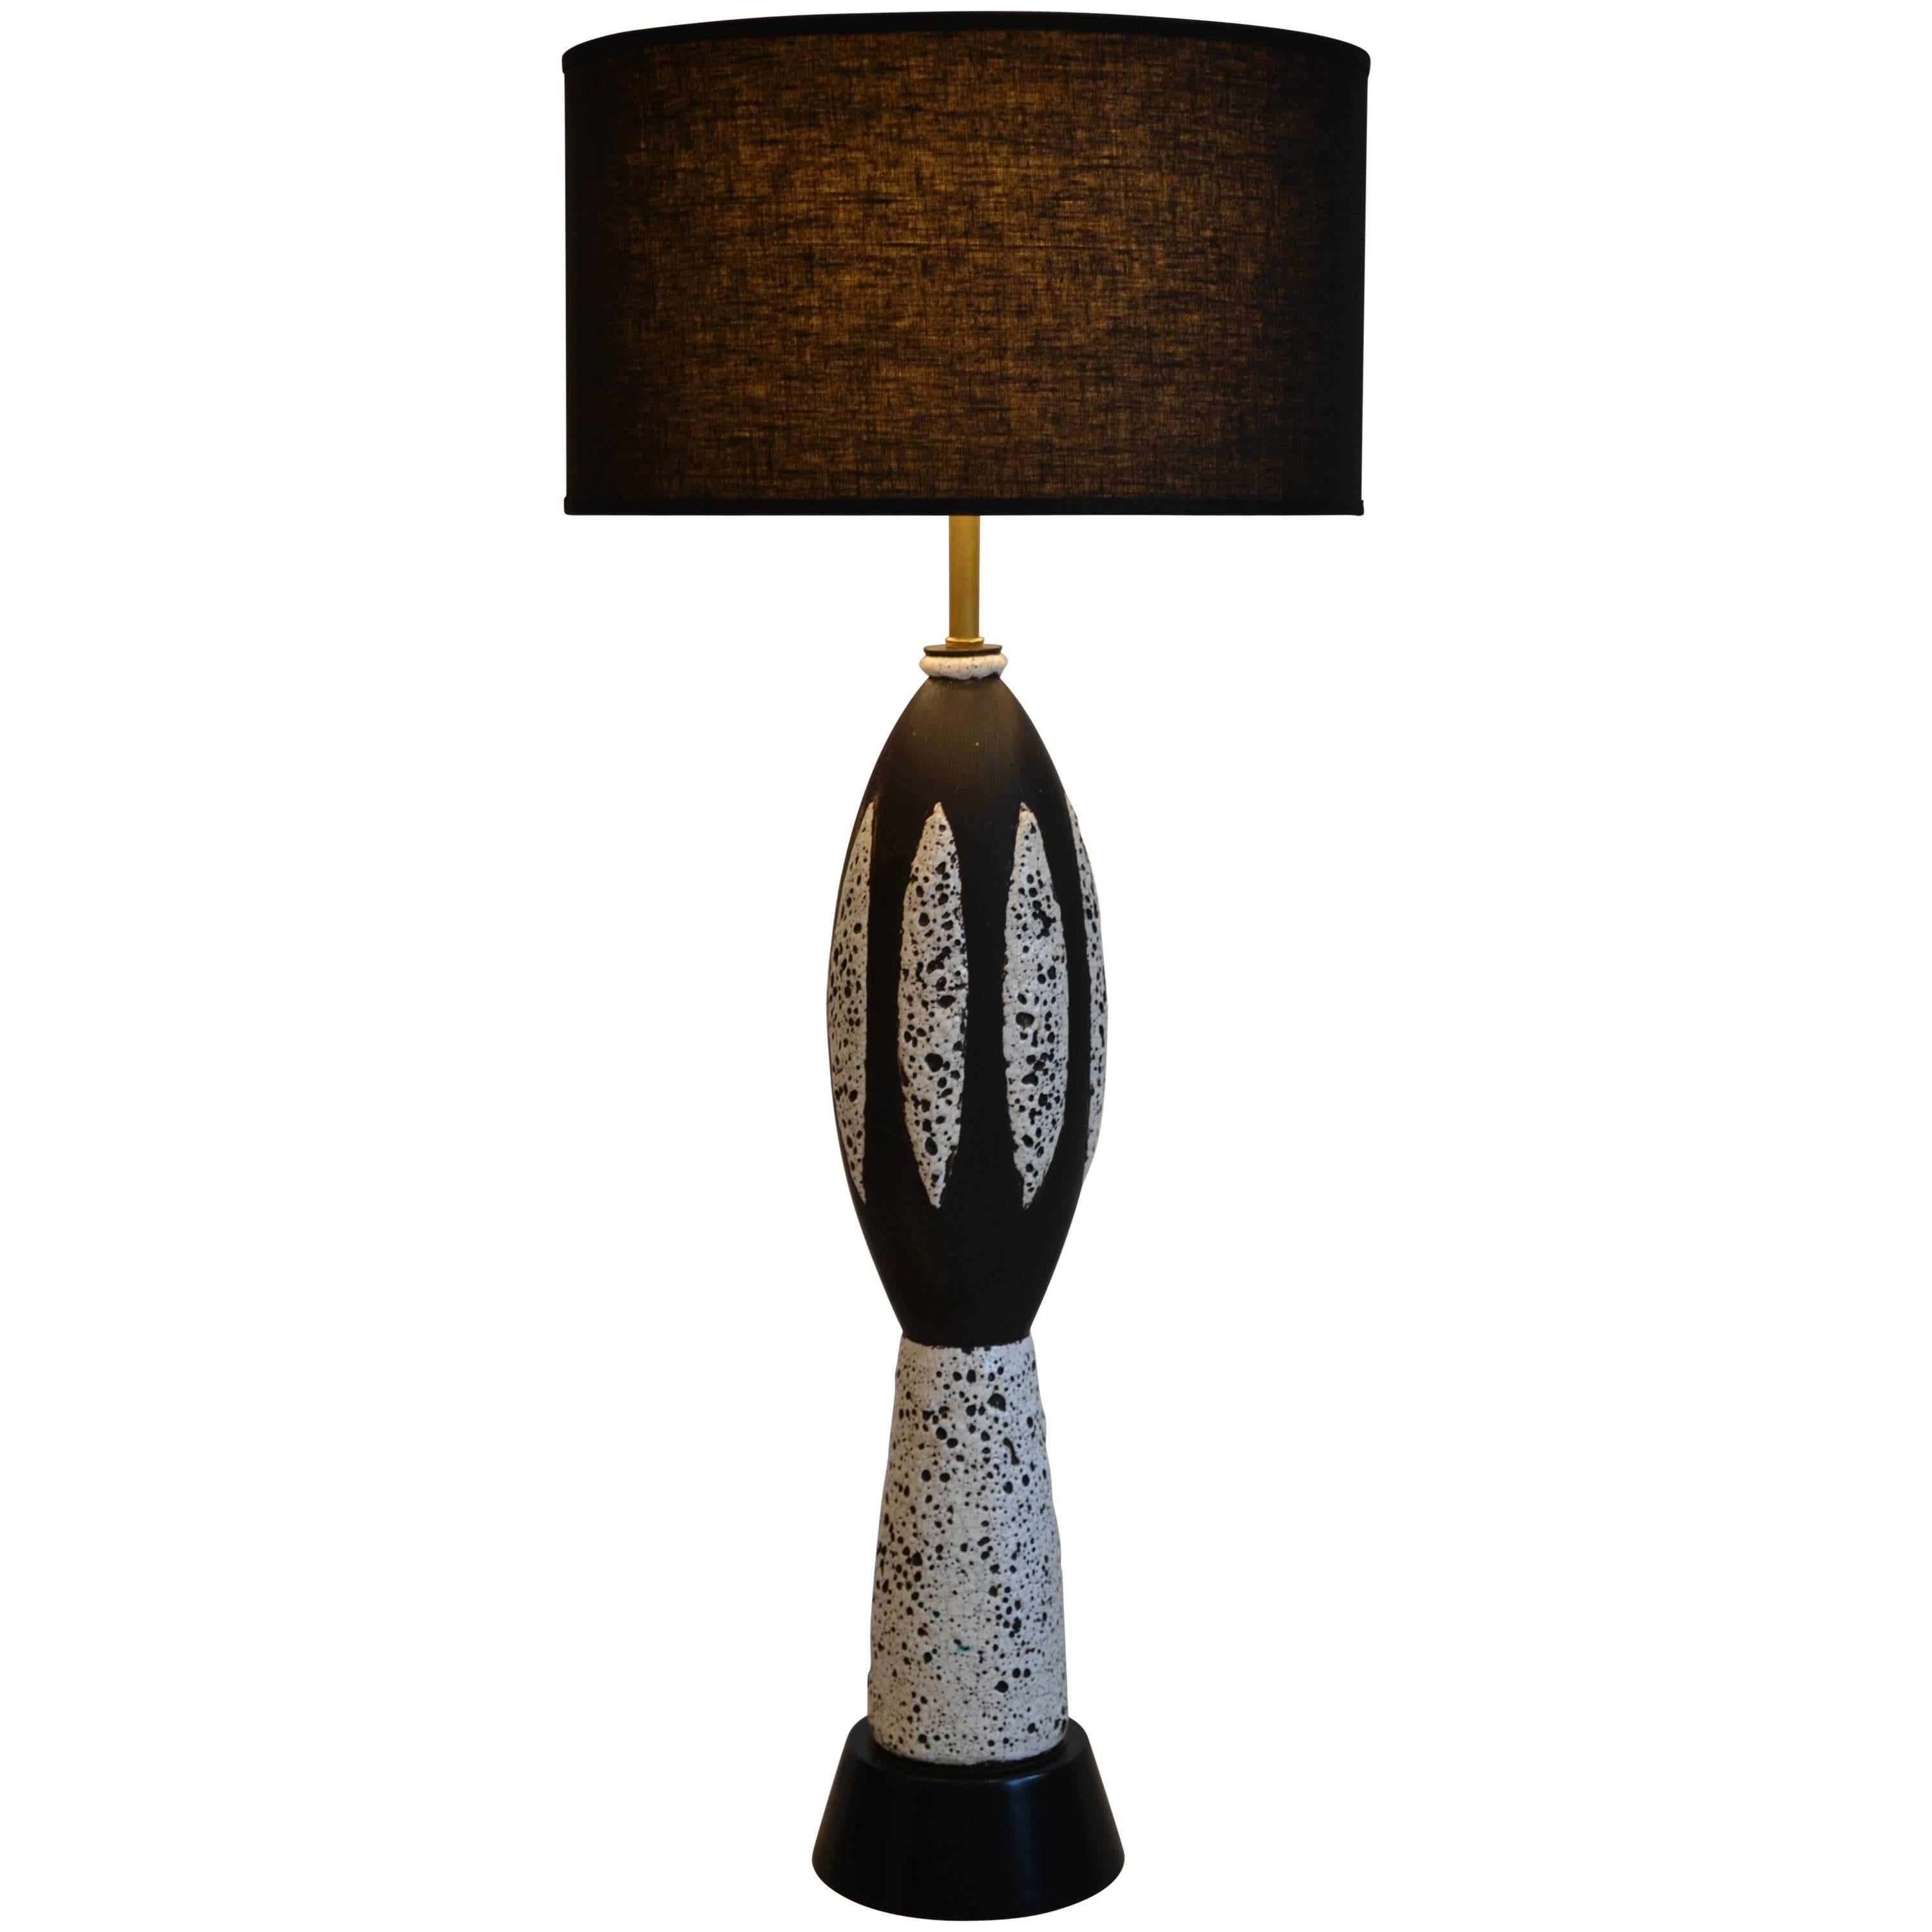 Mid-Century Modern Black and White Ceramic Table Lamp, Large Scale, 1950's For Sale